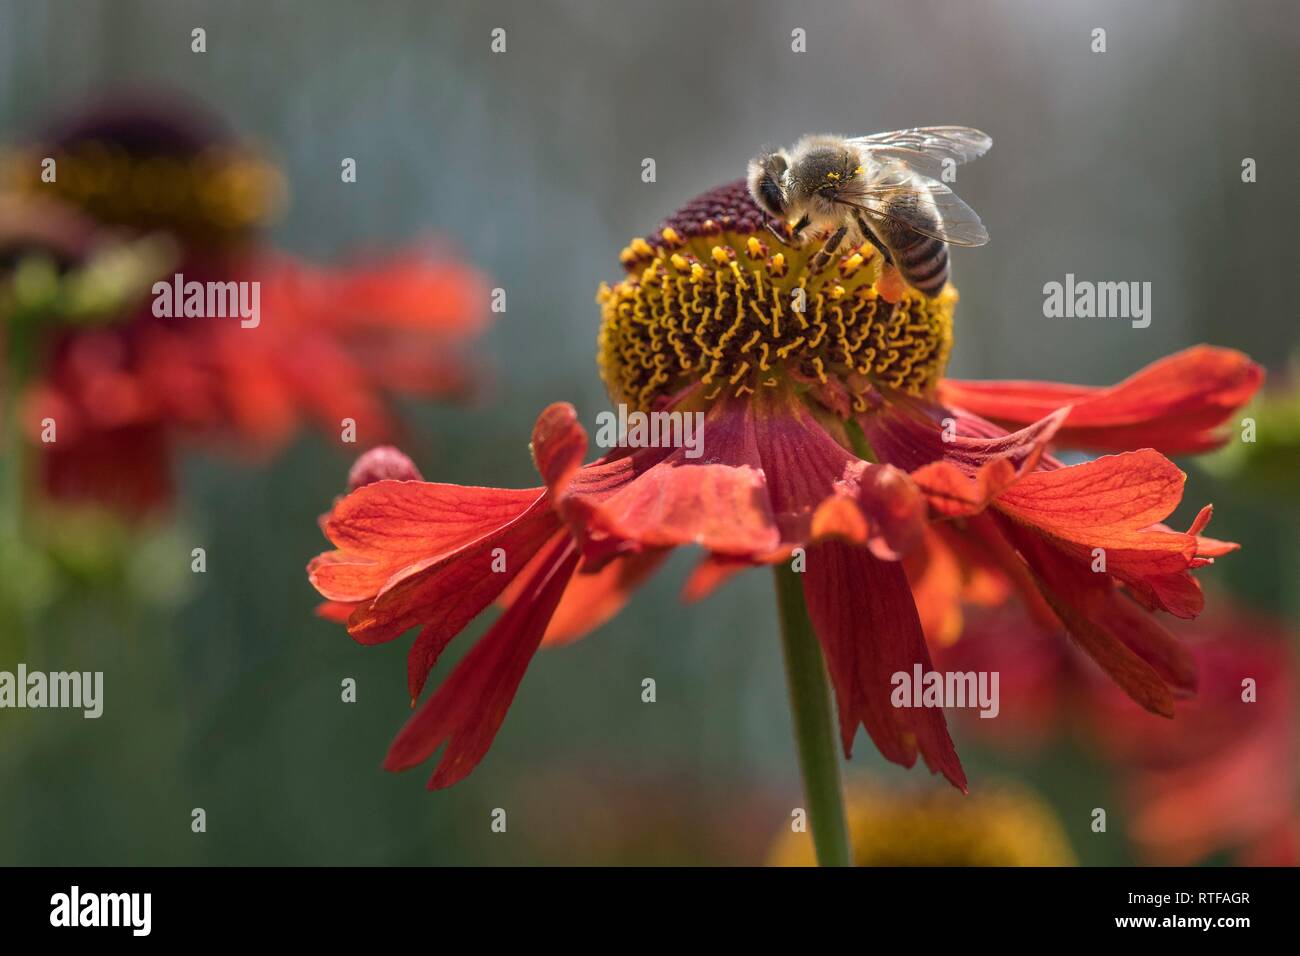 Honey bees (Apis mellifera) in nectar search, Baden-Württemberg, Germany Stock Photo